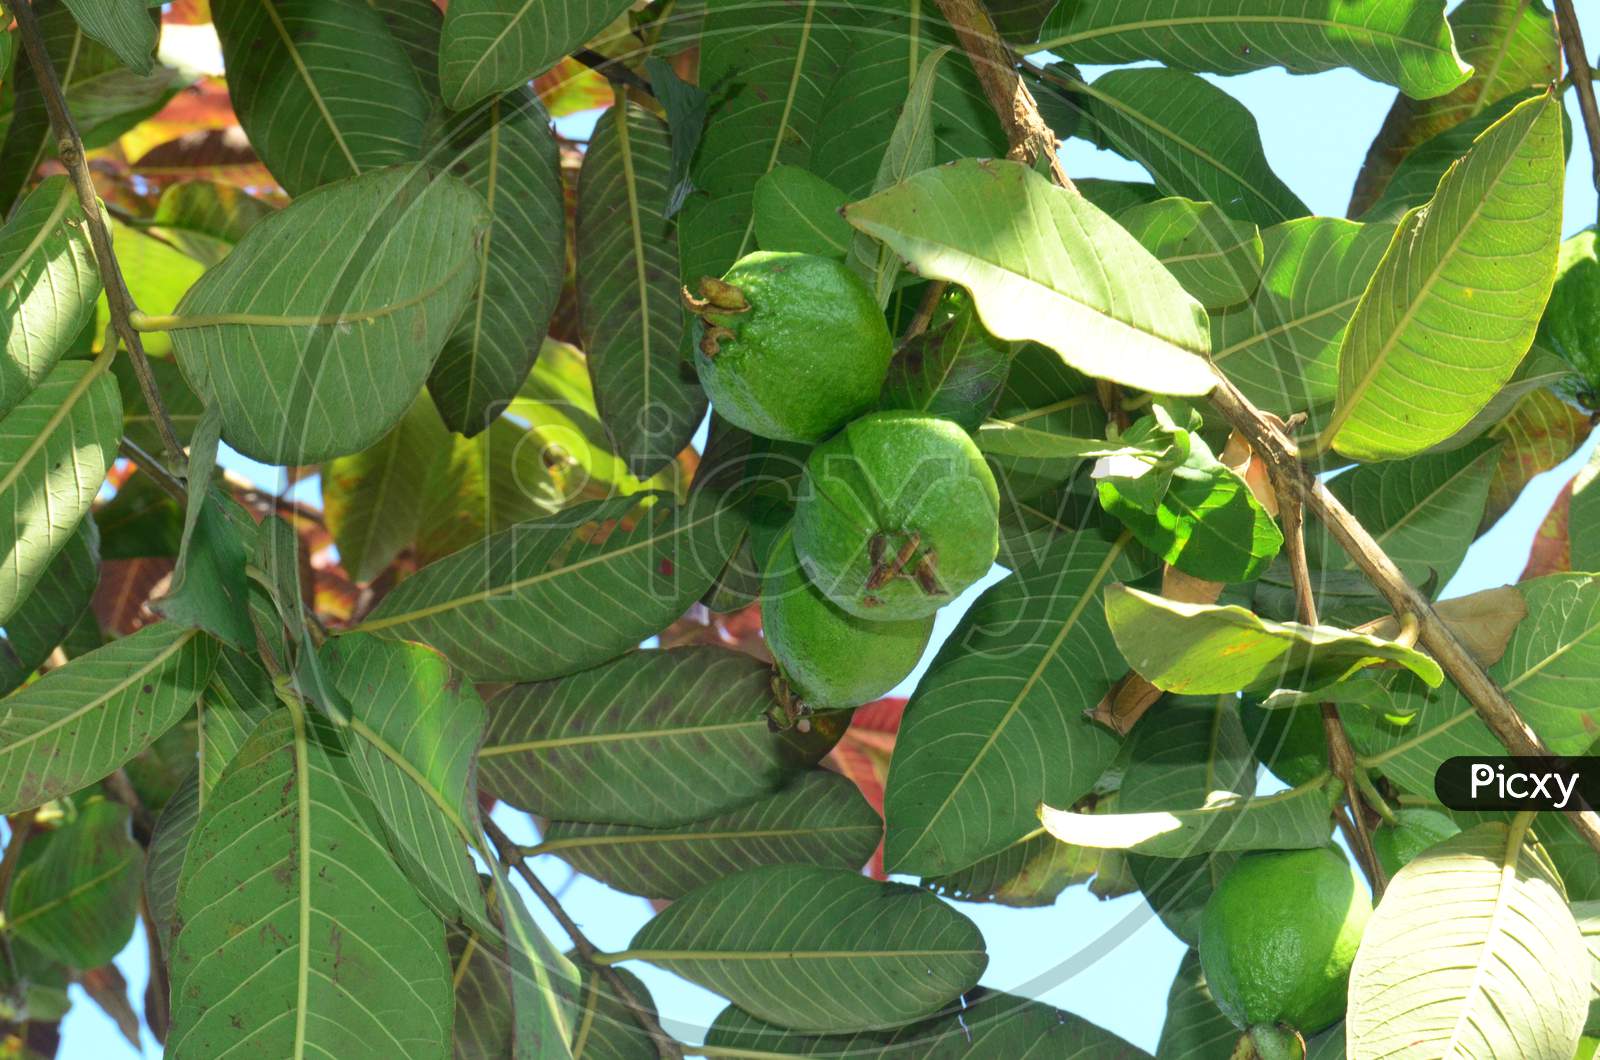 Guava Fruits Growing on Plant